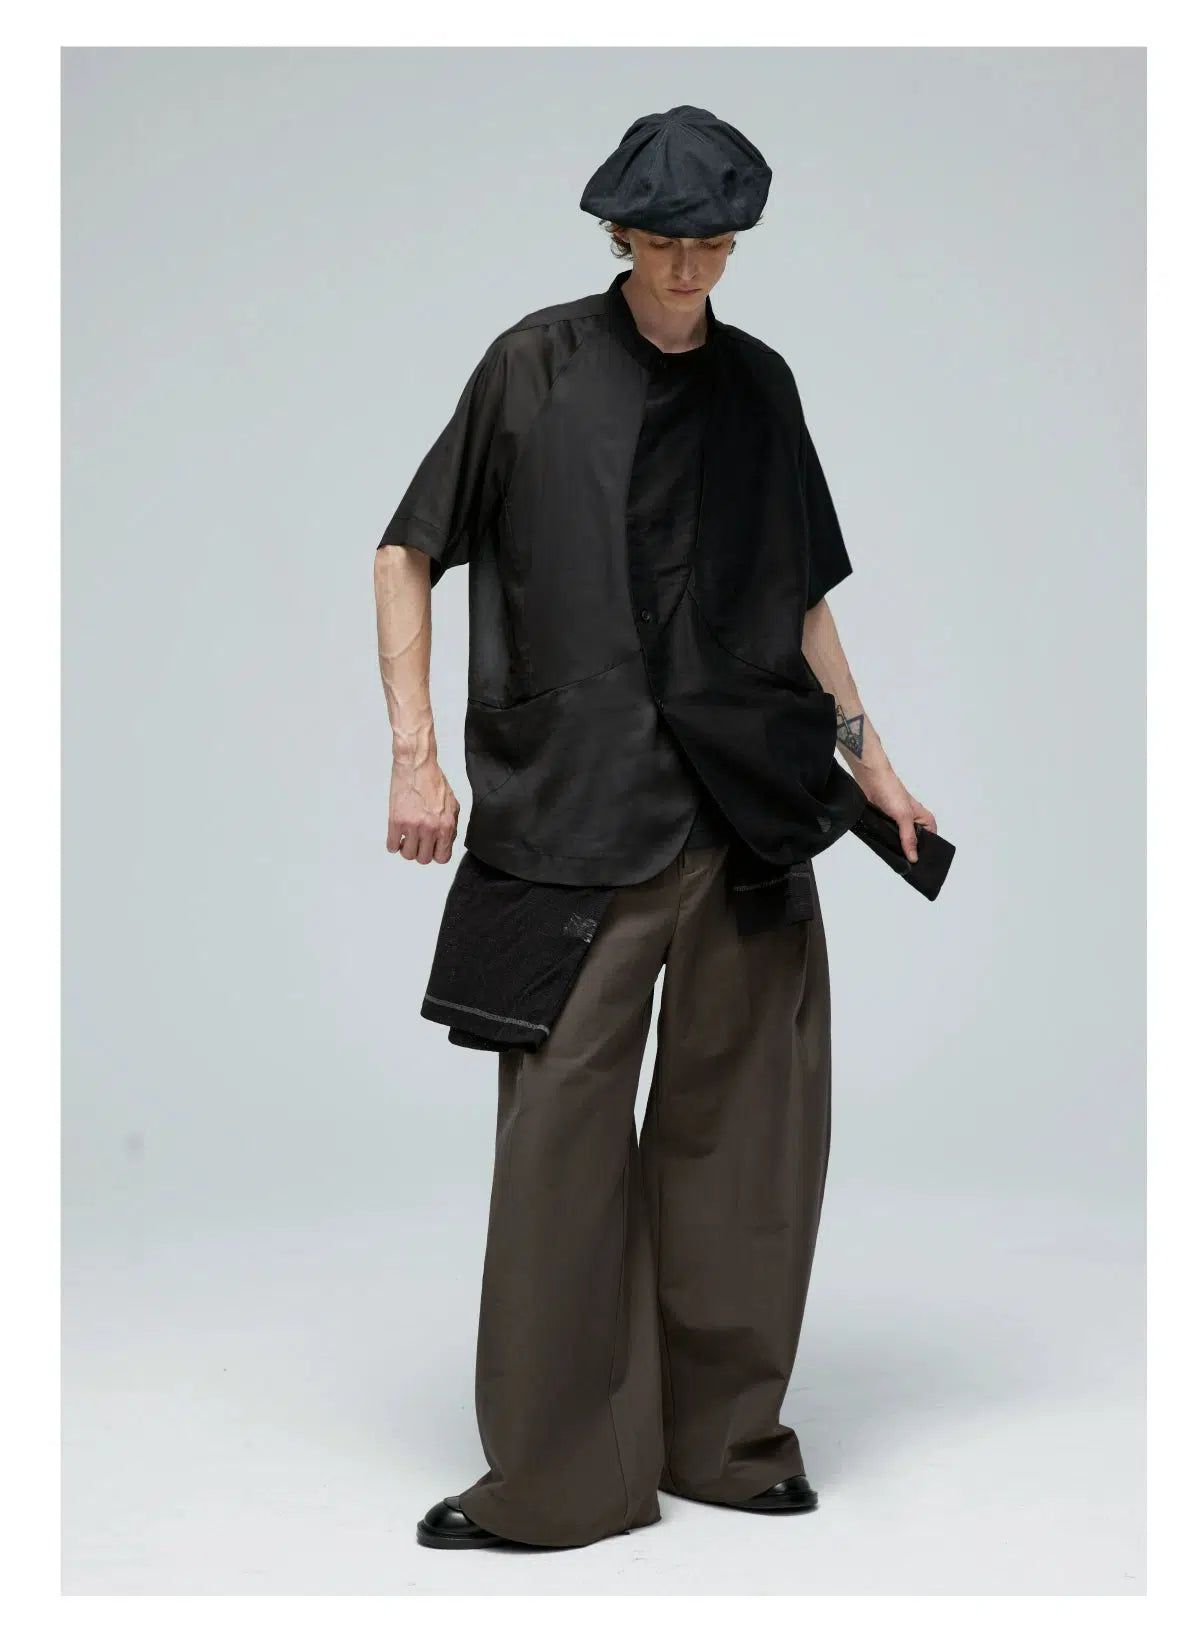 Curved Ends Loose Shirt Korean Street Fashion Shirt By Decesolo Shop Online at OH Vault